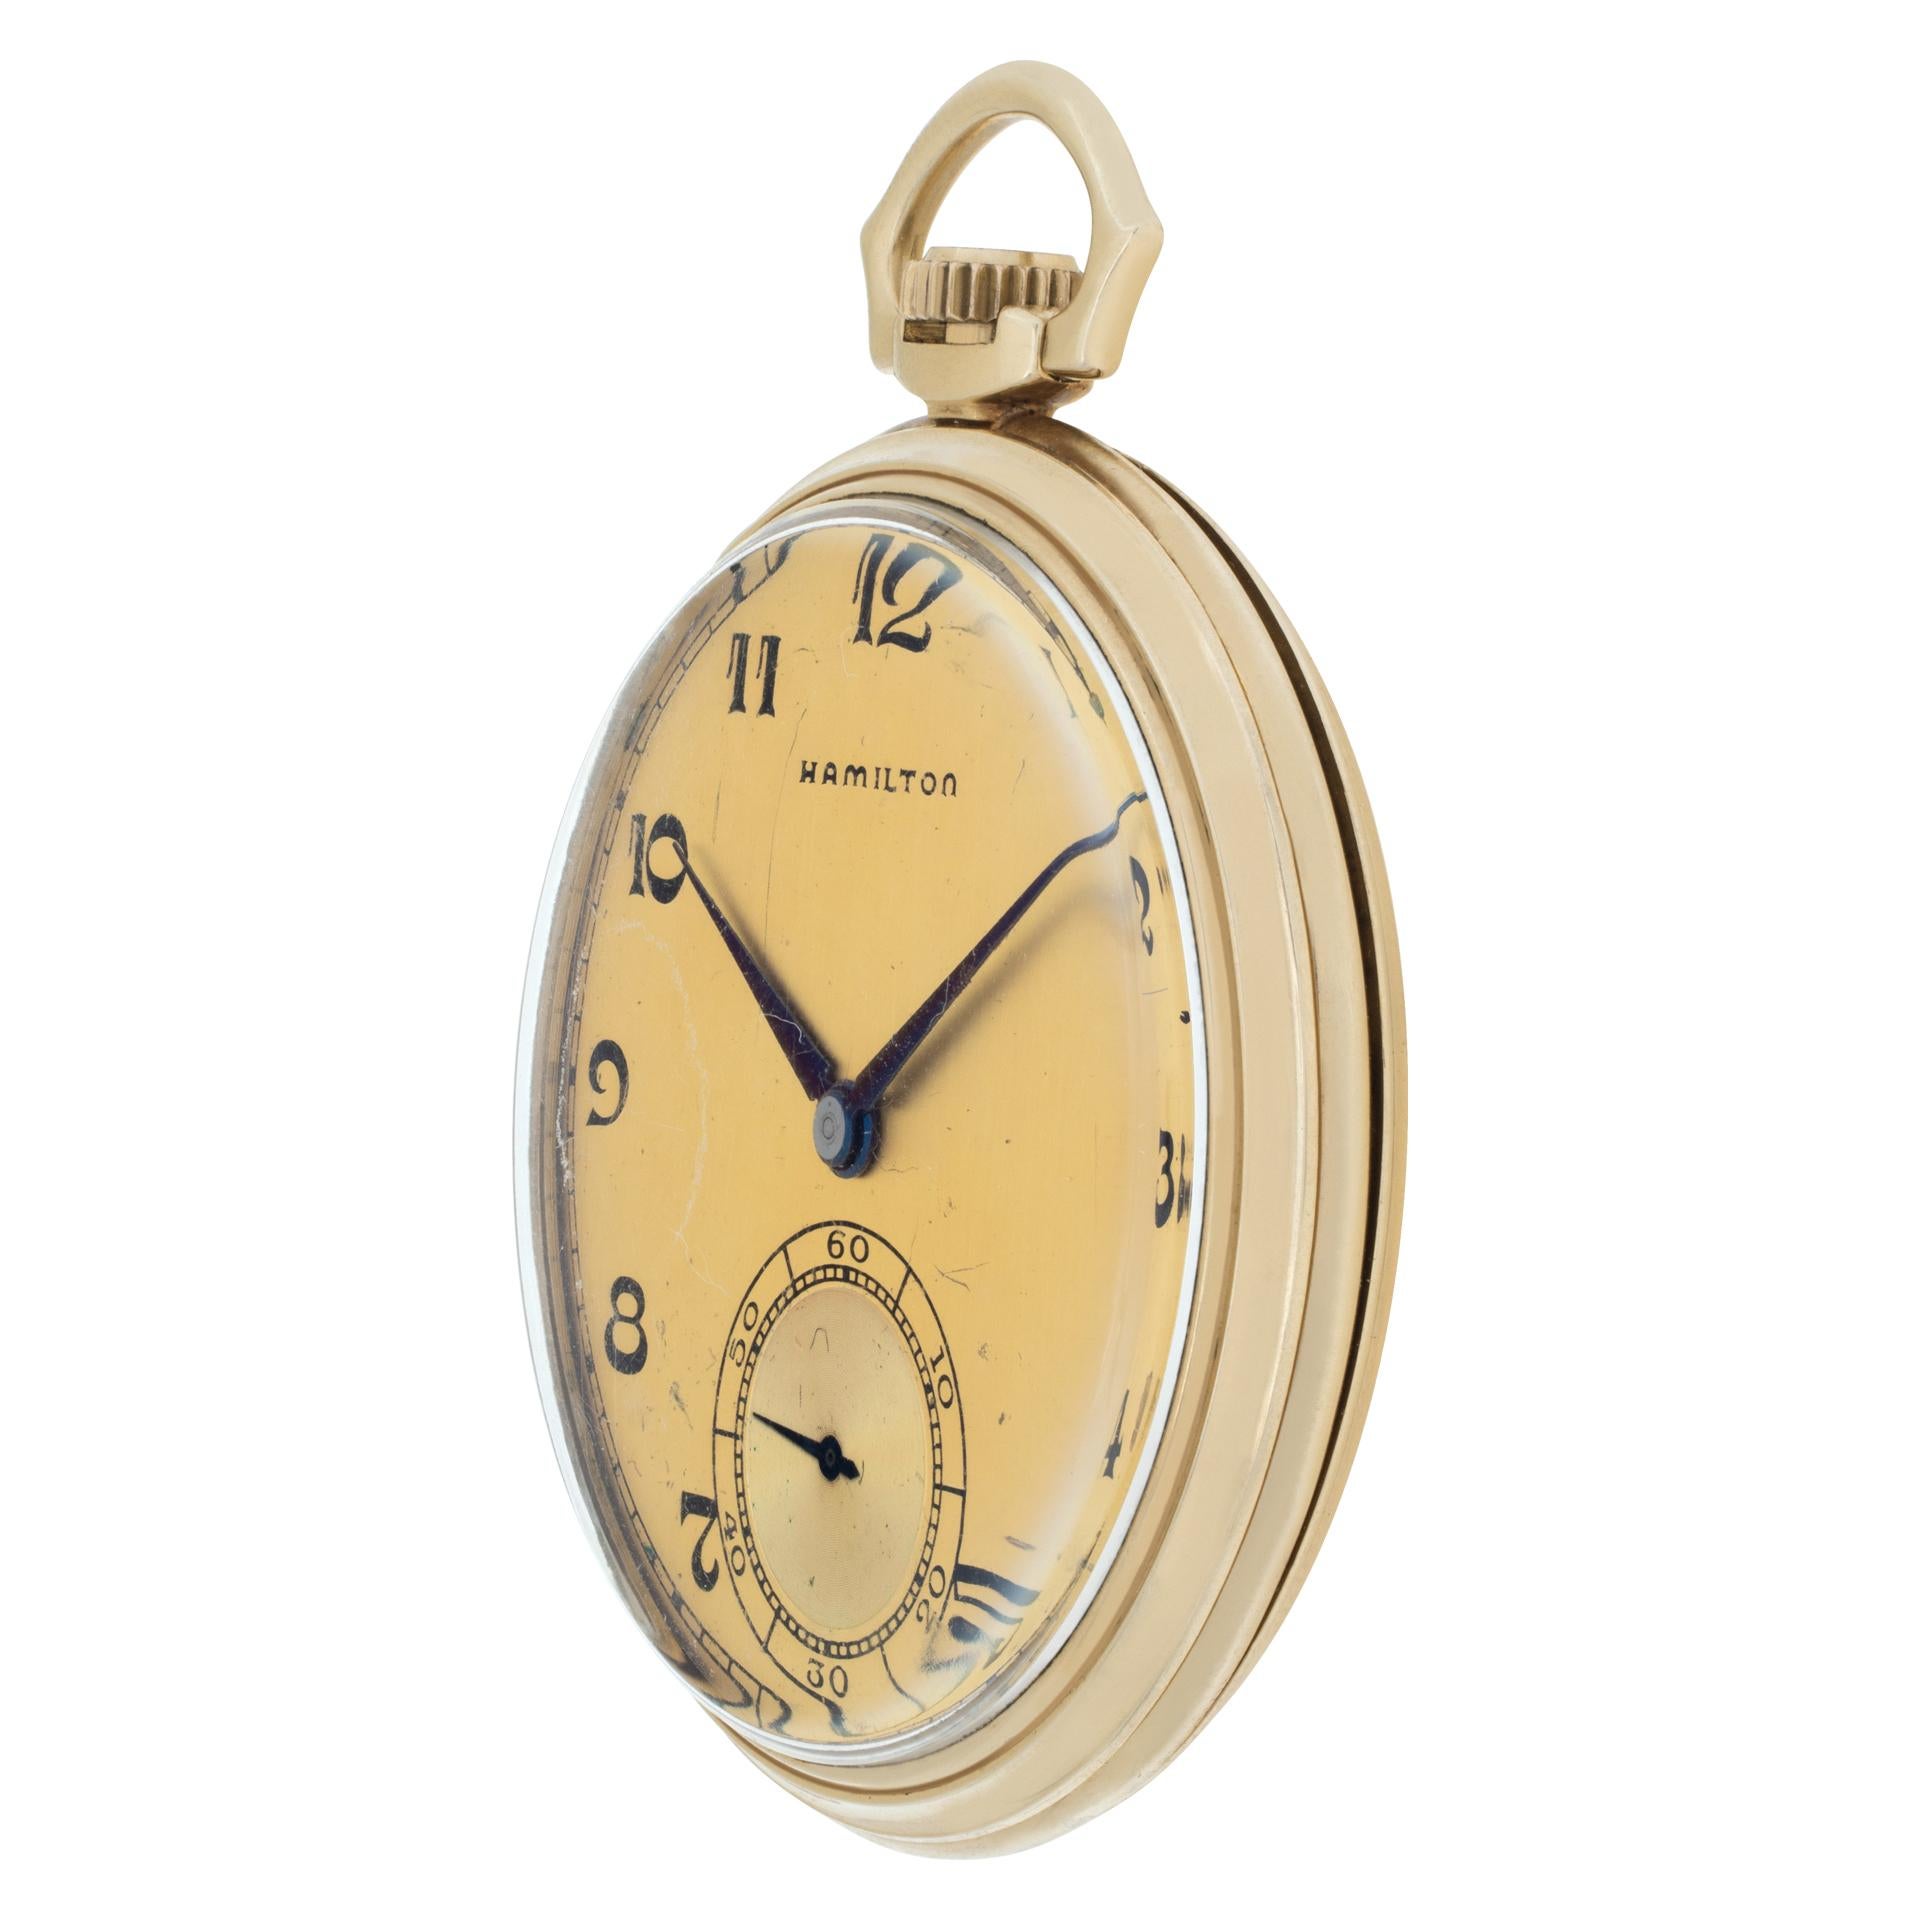 Hamilton pocket watch in 14k yellow gold - model 923 manual wind movement with 23 jewels. The best of the best made in America. Arabic numerals with subseconds on the dial. 44 mm case size. Presentation watch from 1953. Ref R3163. Fine Pre-owned